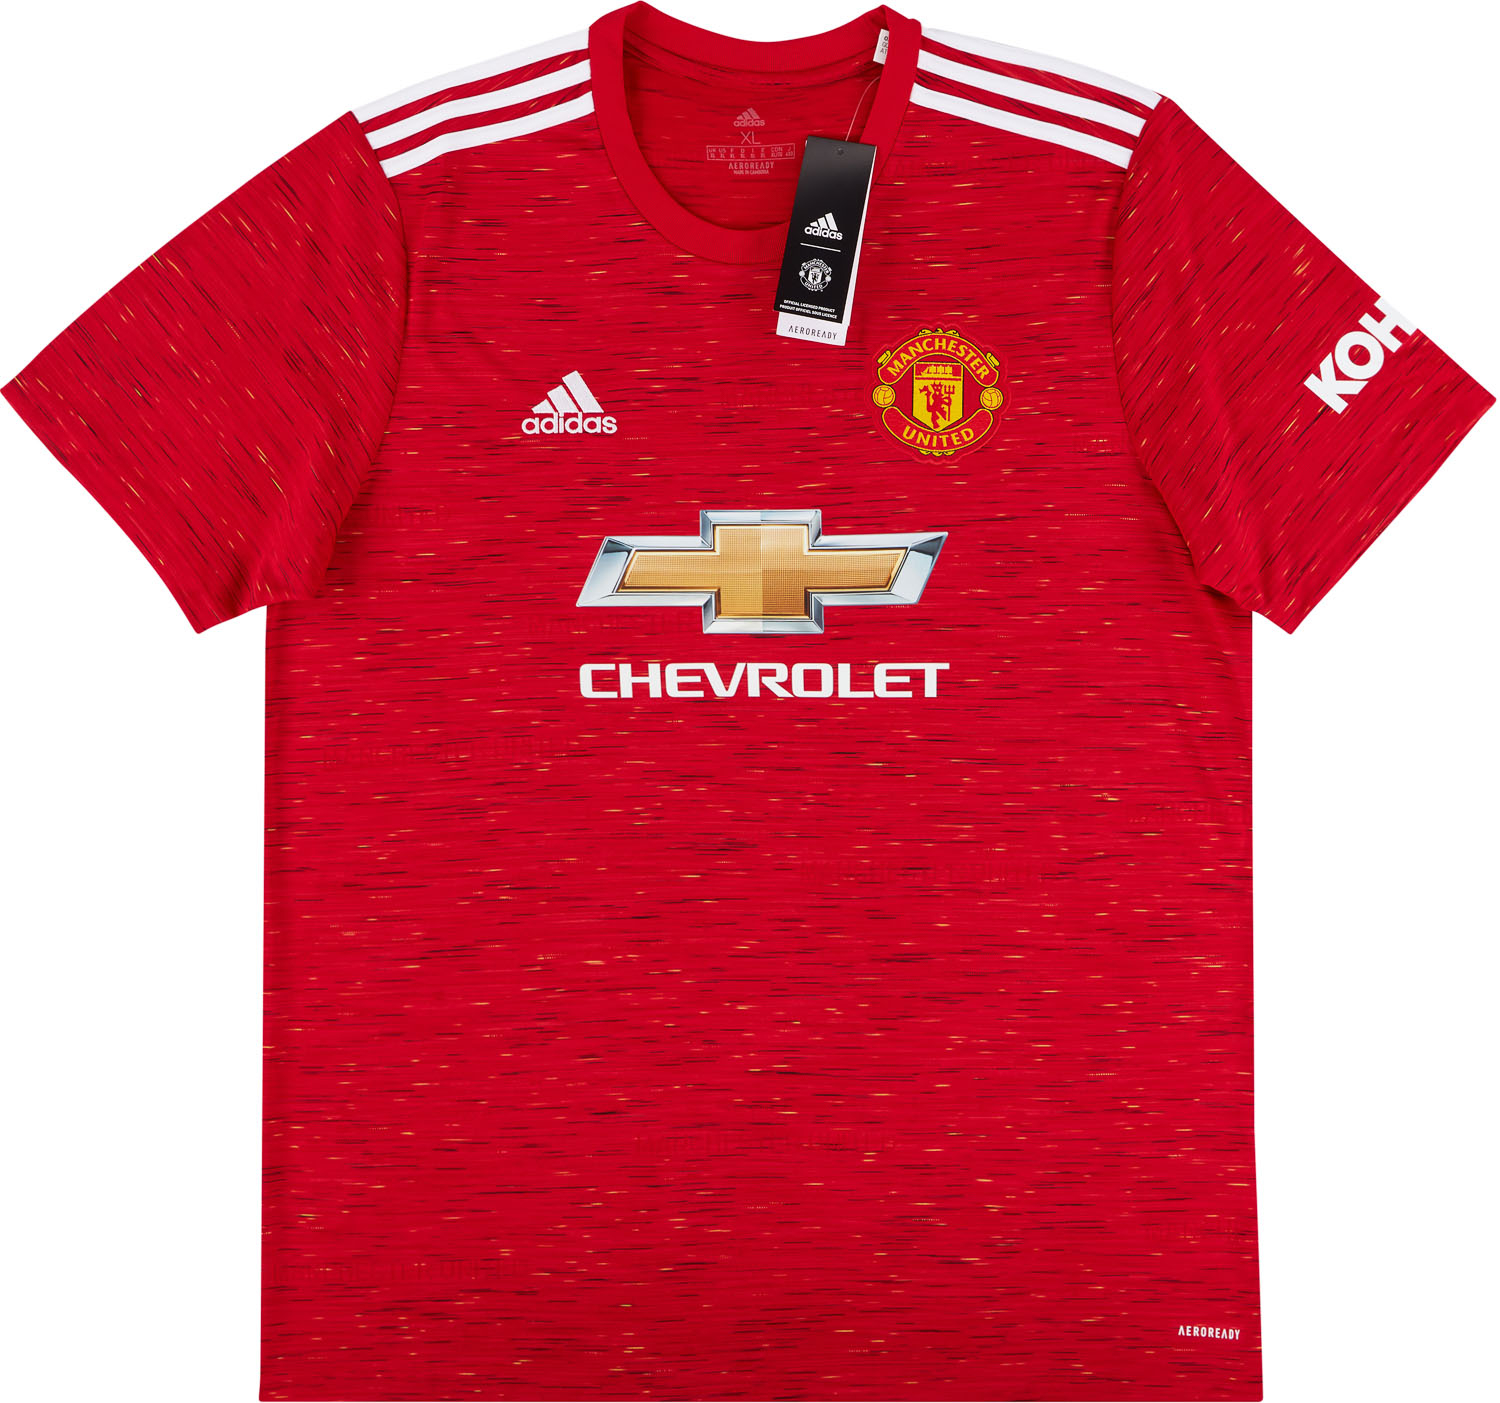 2020-21 Manchester United Home Shirt - NEW